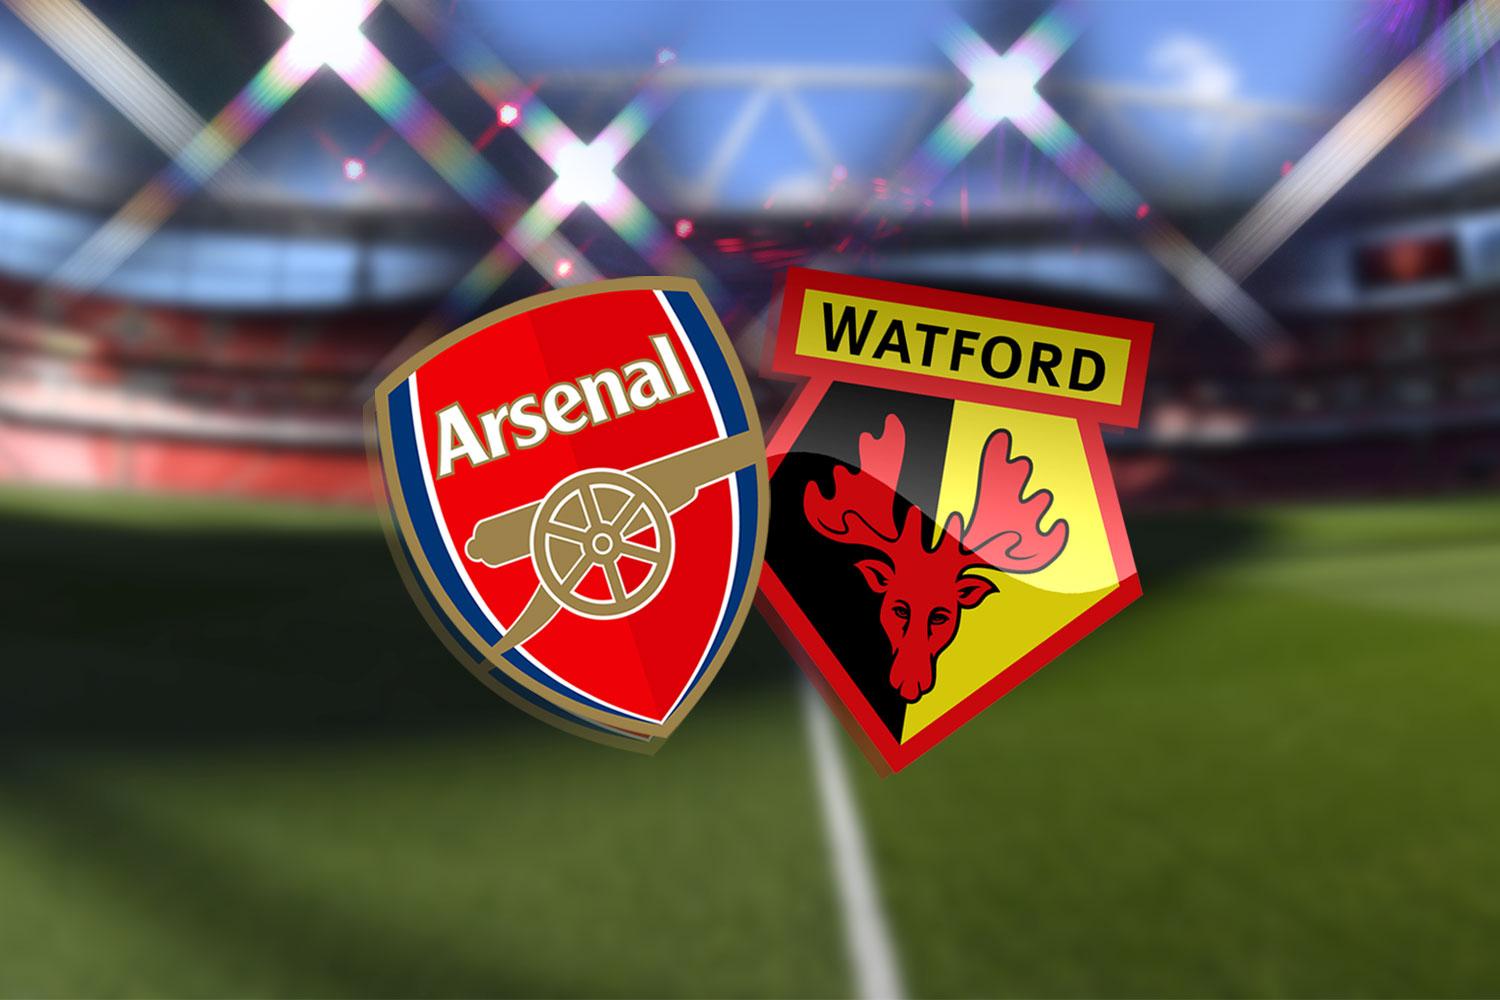 Arsenal V Watford Build Up Predicted Score As Opponents Fight To Survive Drop Just Arsenal News